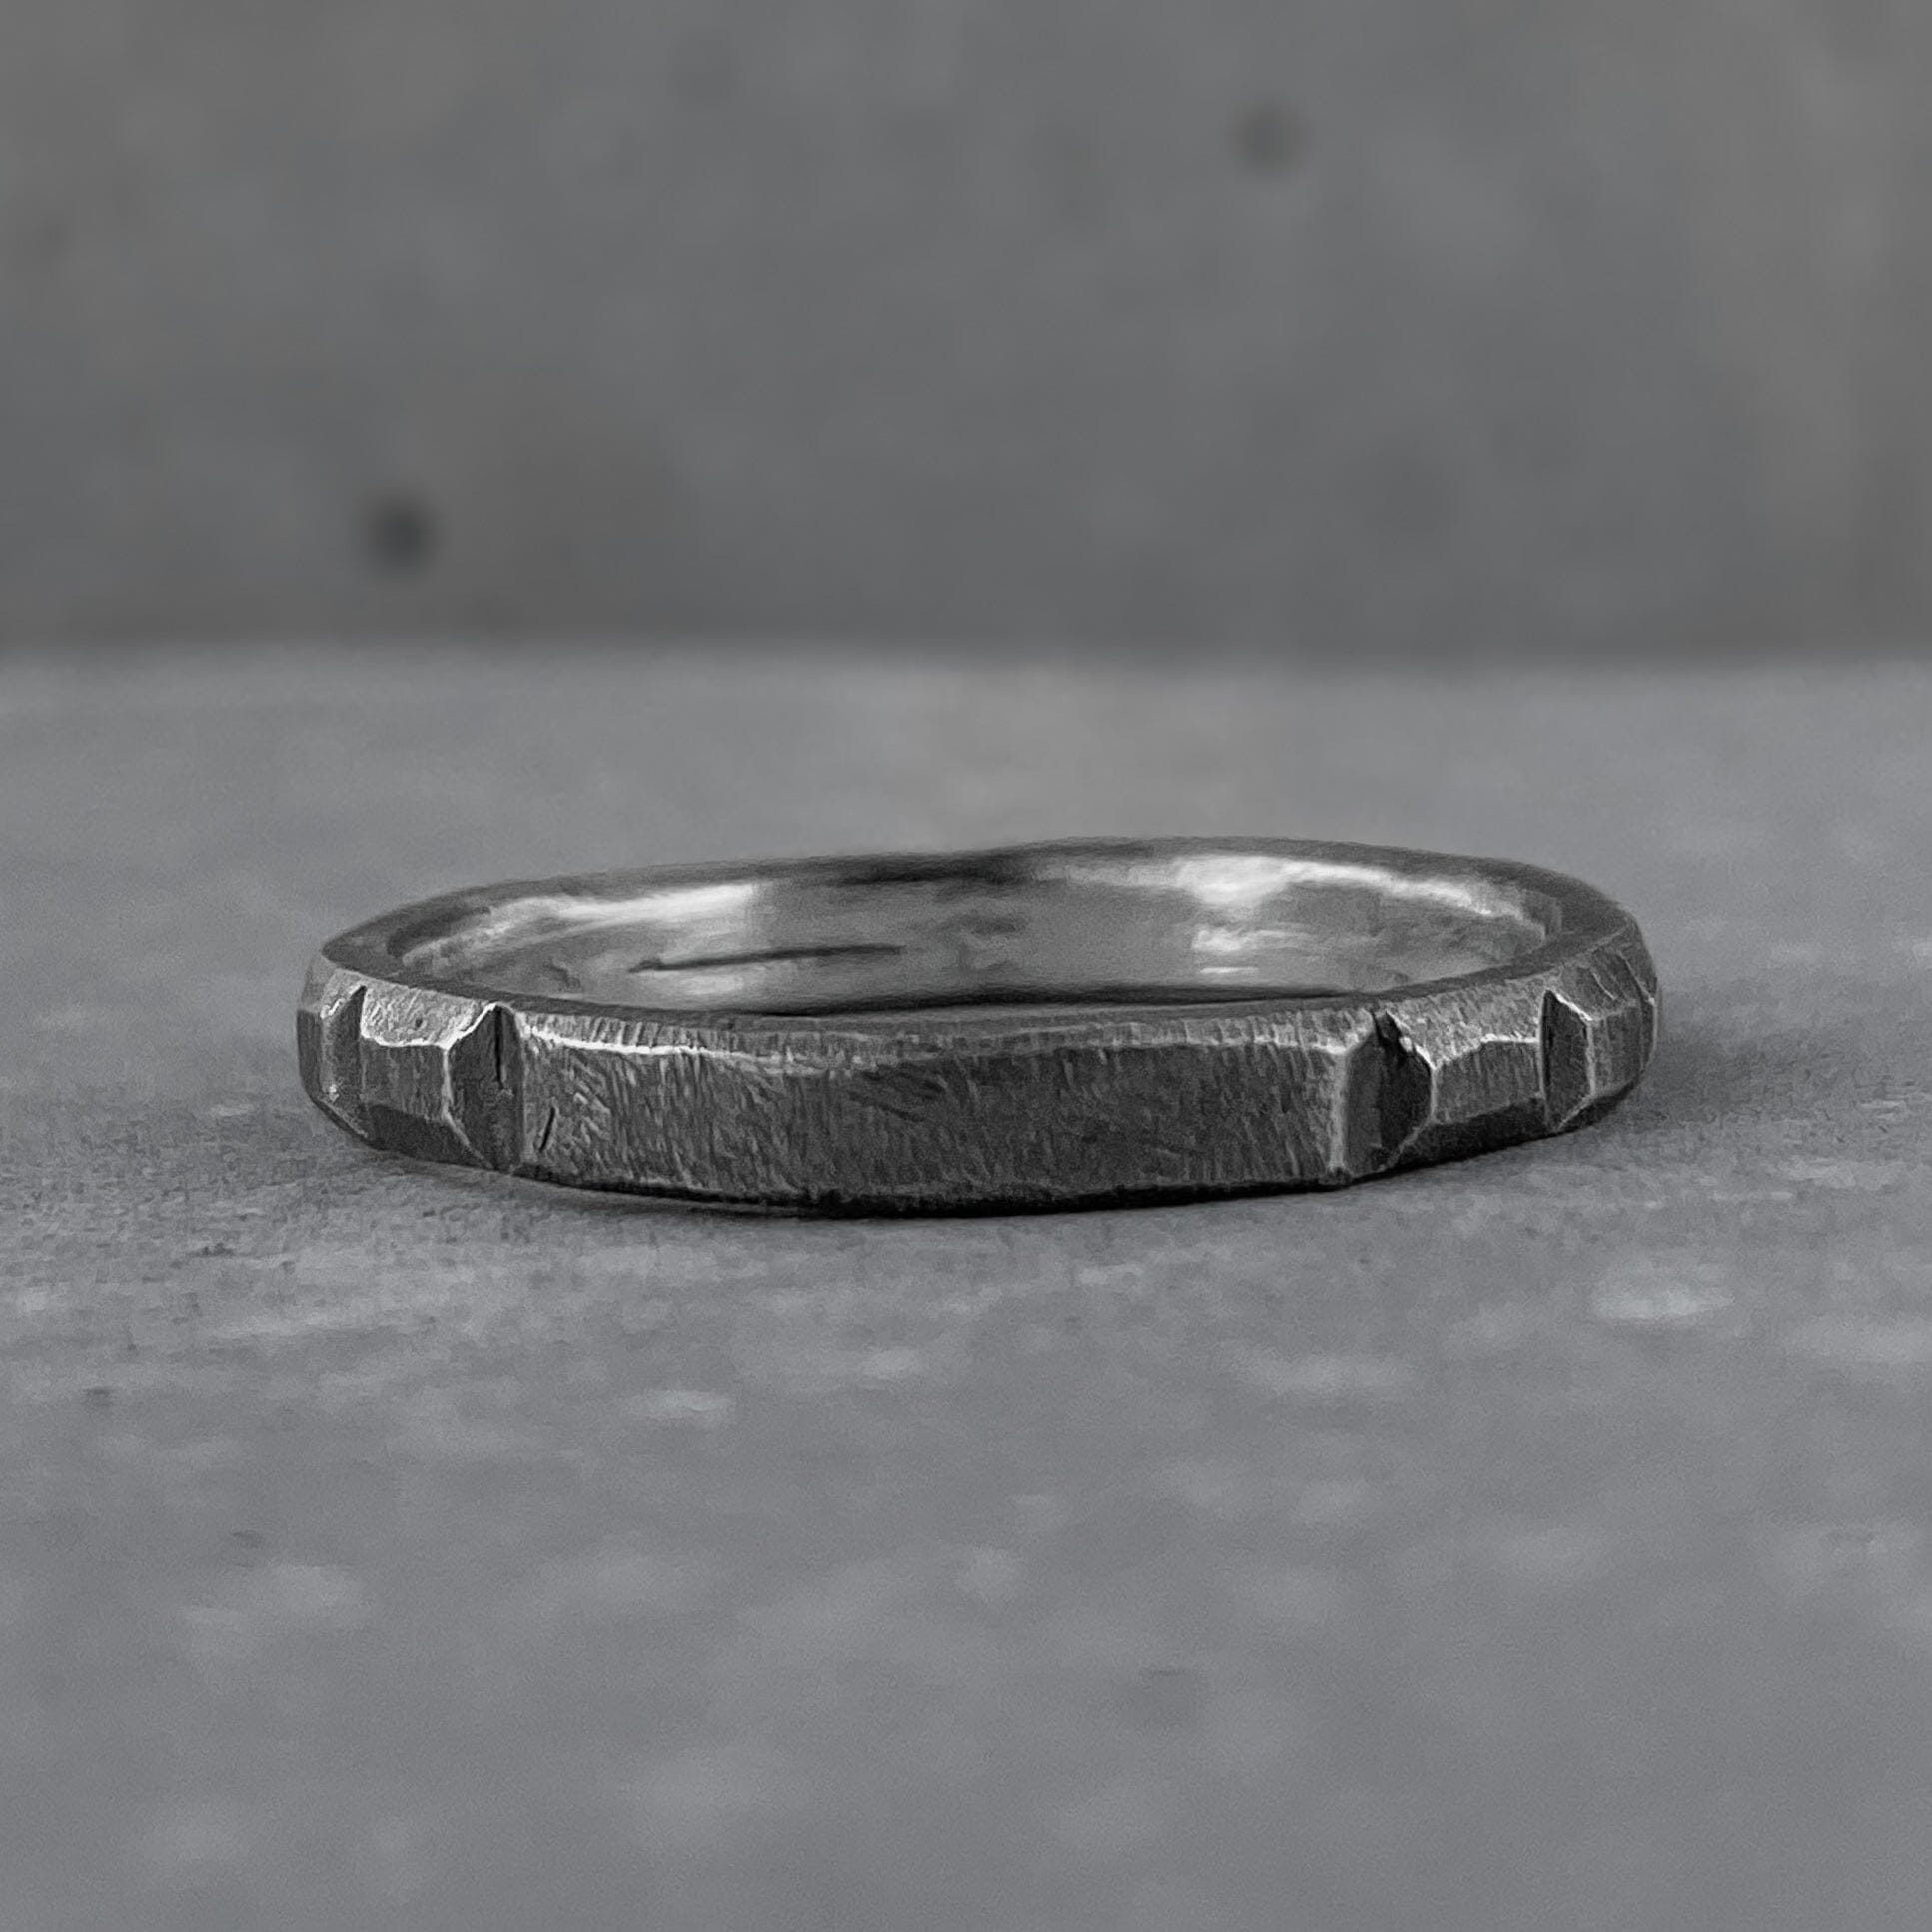 Block ring- simple minimalist ring with soft scratched texture Lightweight rings Project50g 